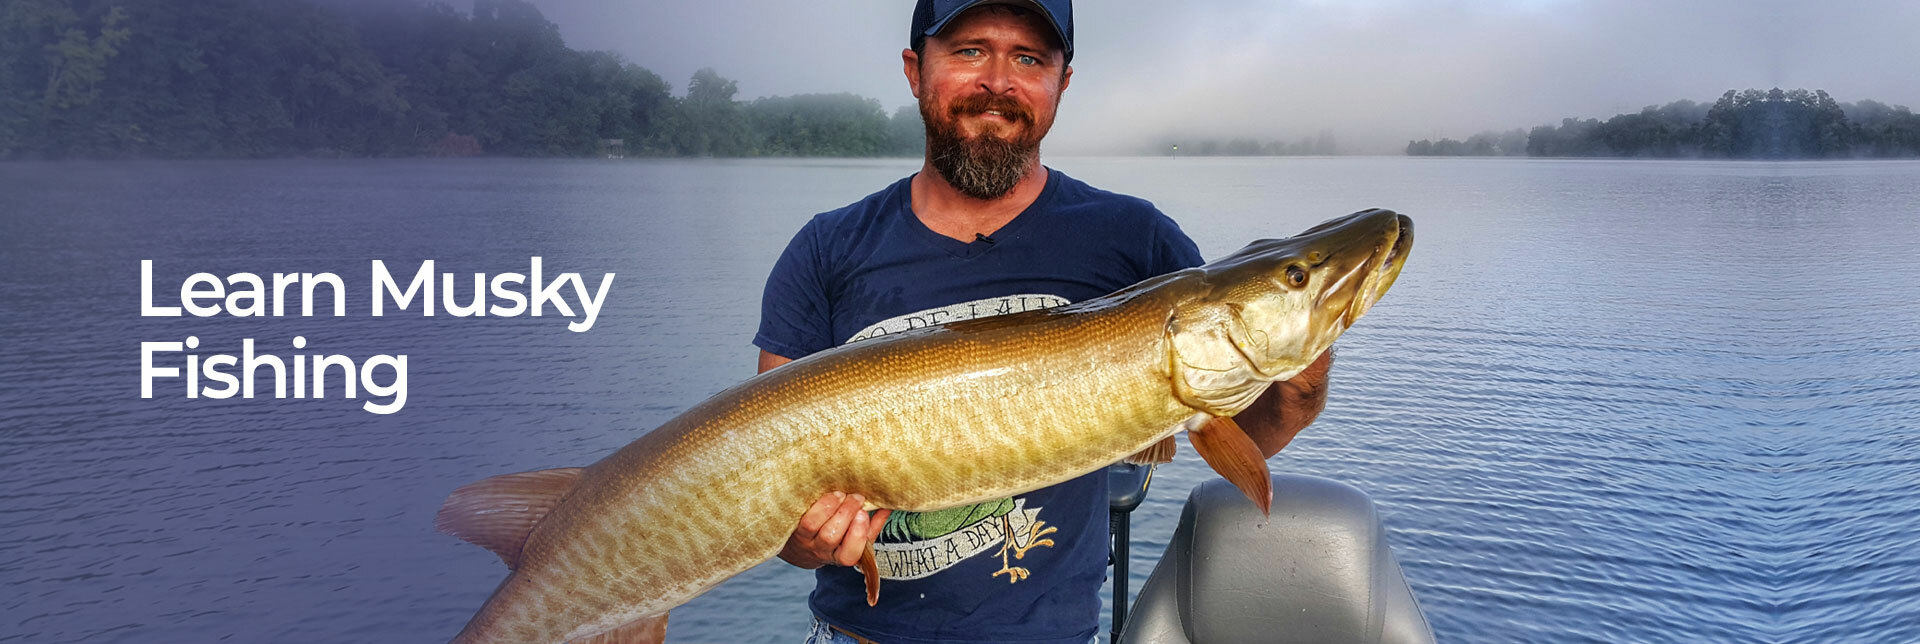 Musky – Learn Musky Fishing, In the Spread Home Slider